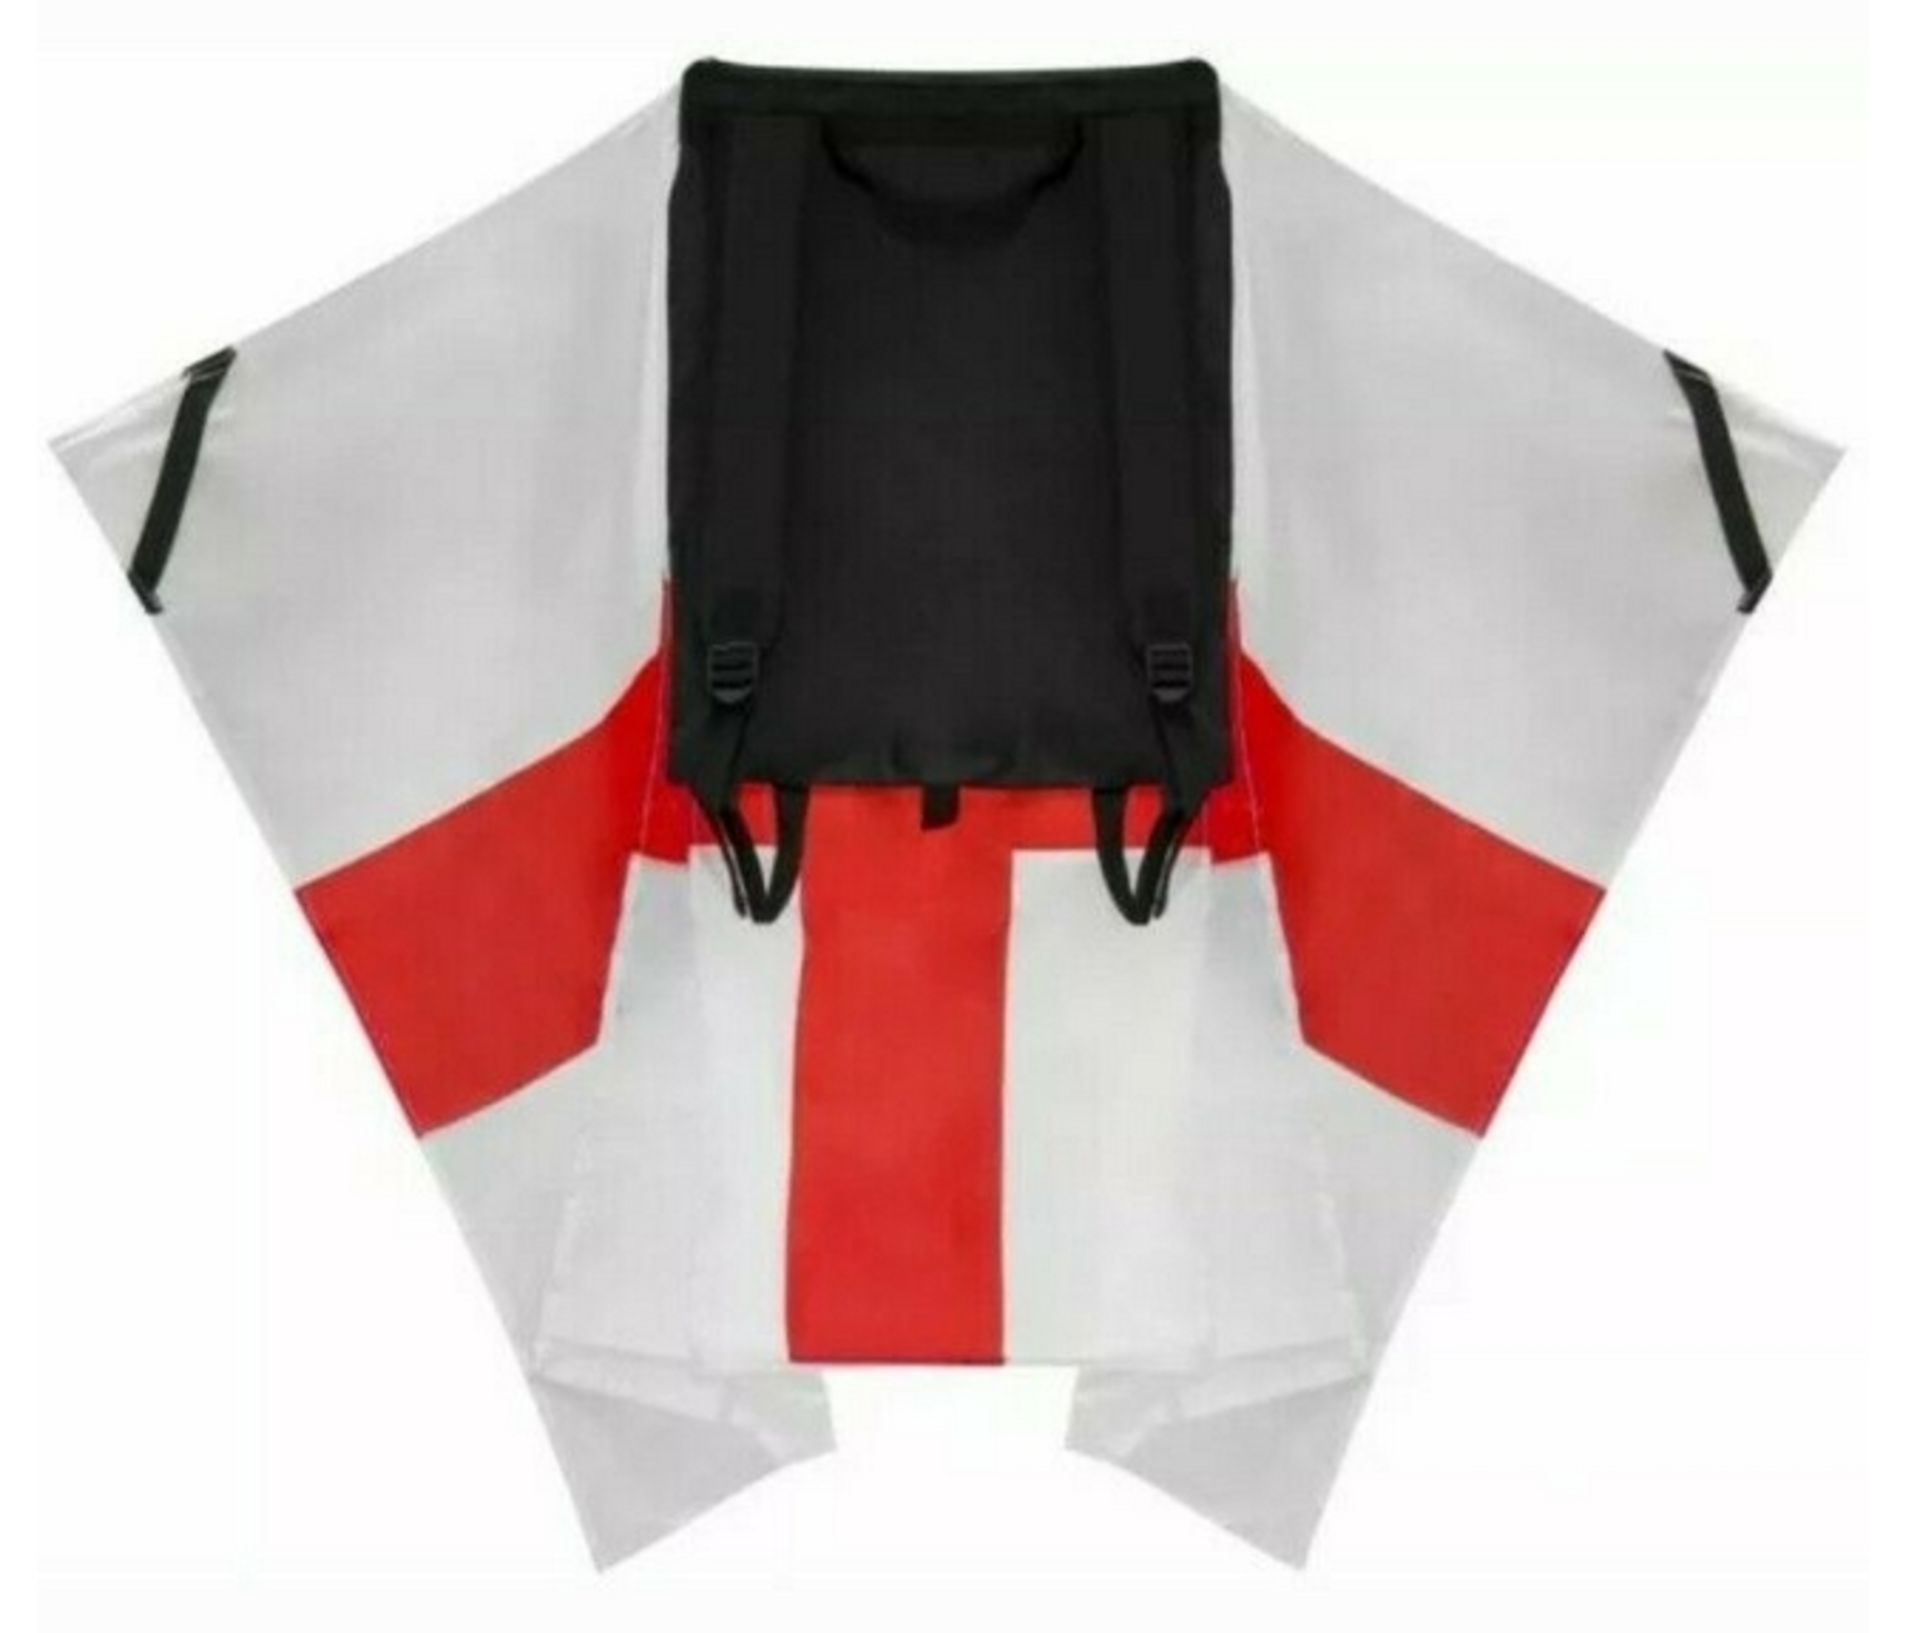 20 x england flag bag 2 in 1 with a huge fold out flag. rrp upto £17.99 each - Image 2 of 2